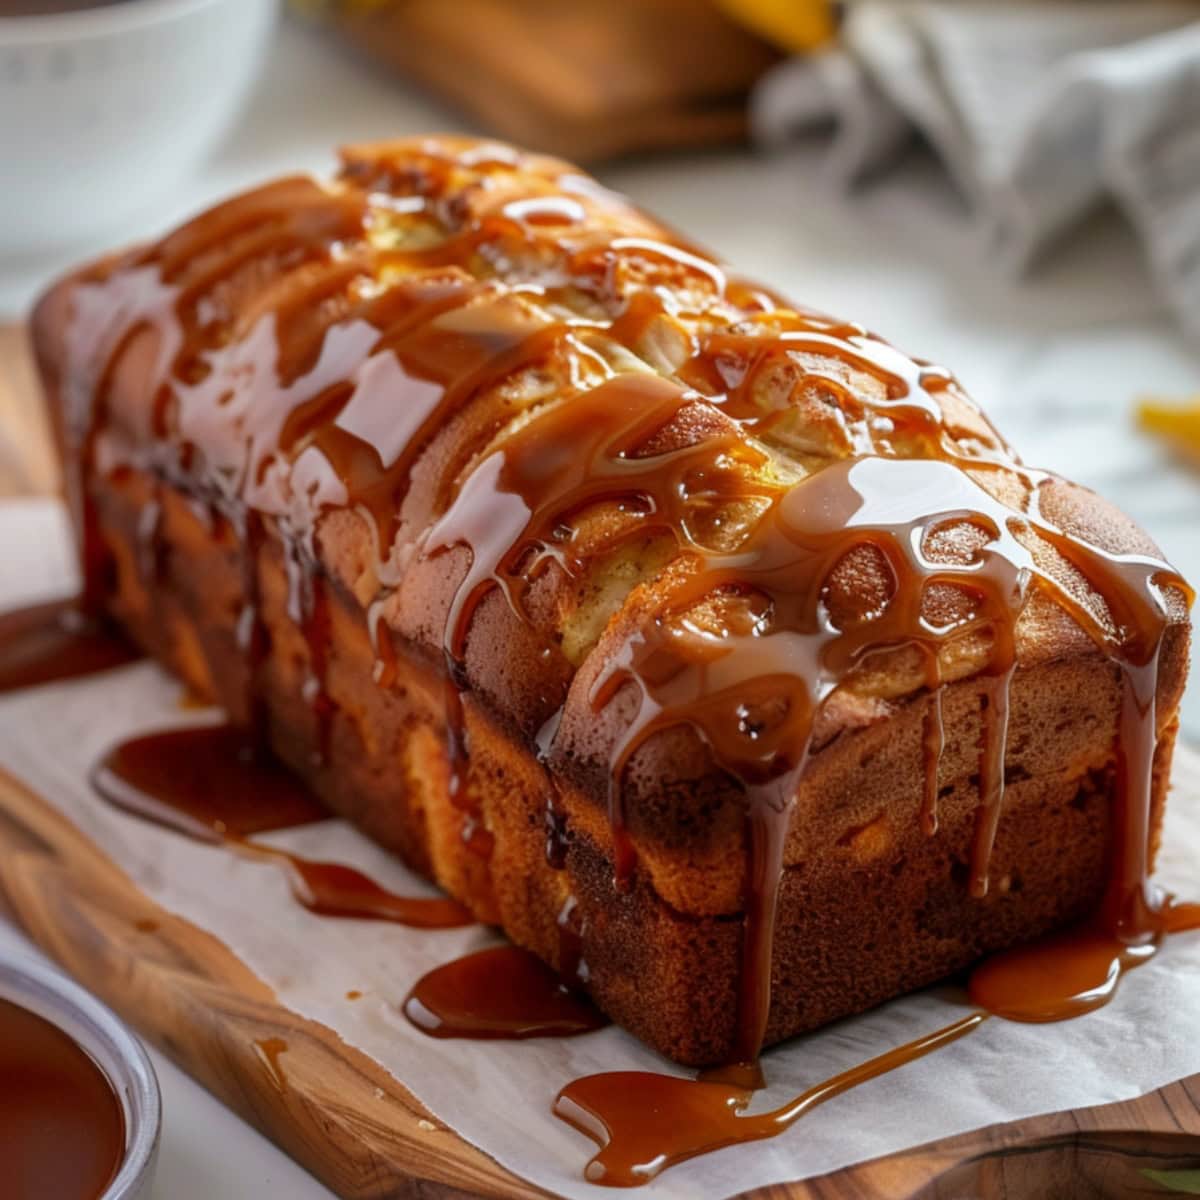 Whole banana loaf bread drizzled with salted caramel.